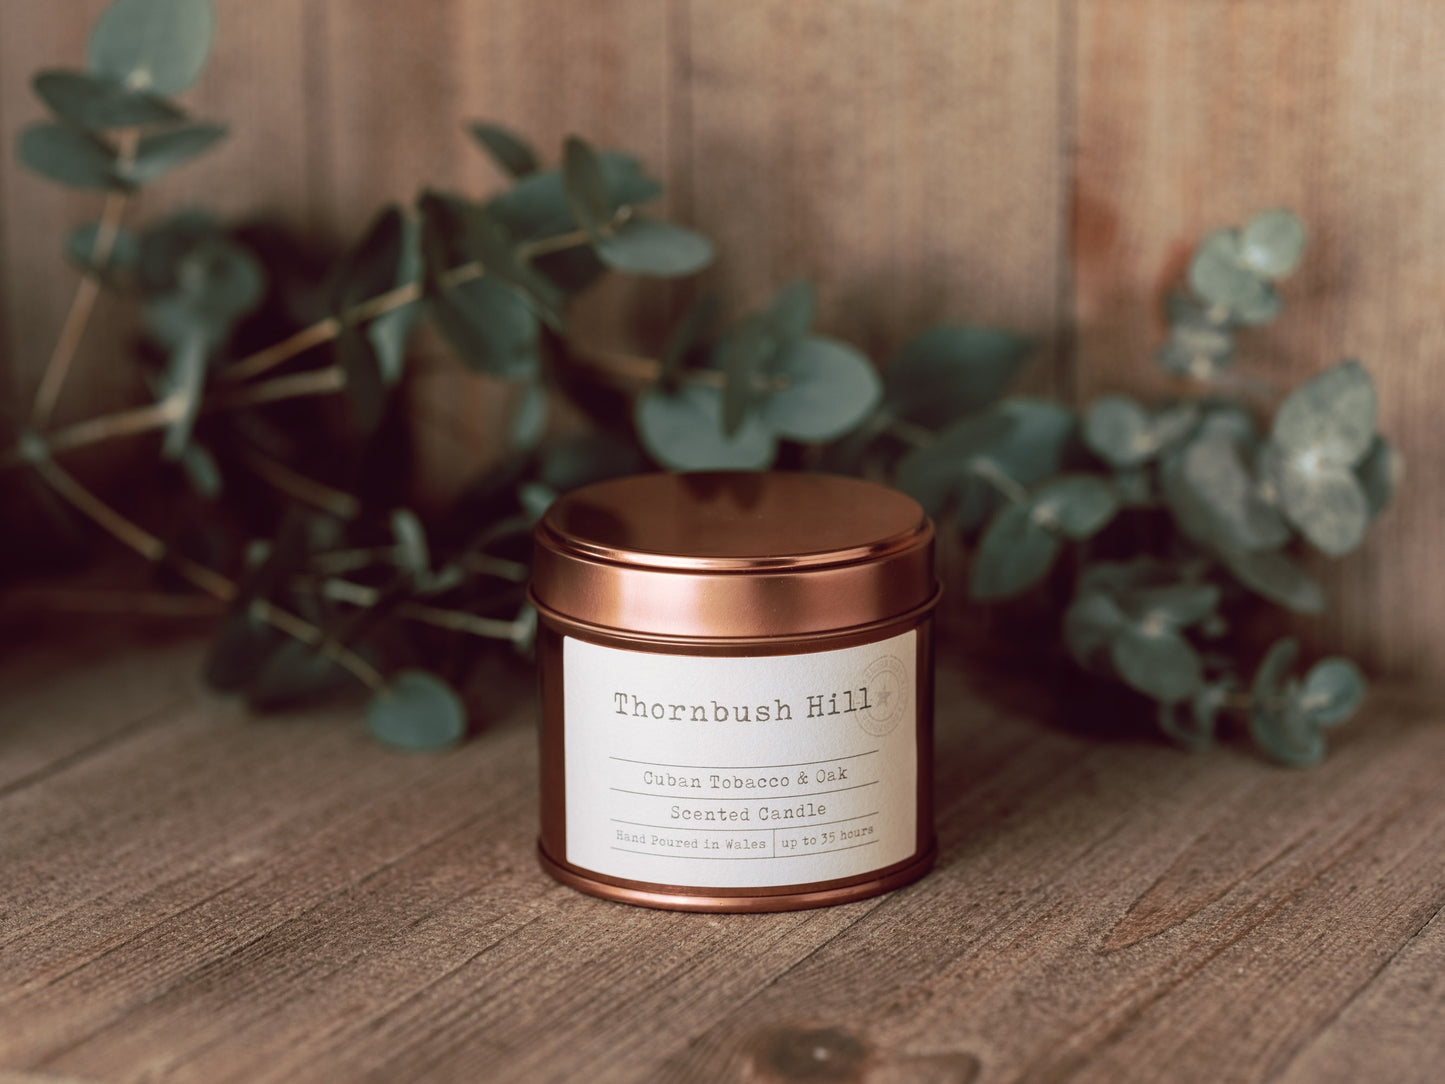 Cuban Tobacco & Oak Scented Soy Tin Candle